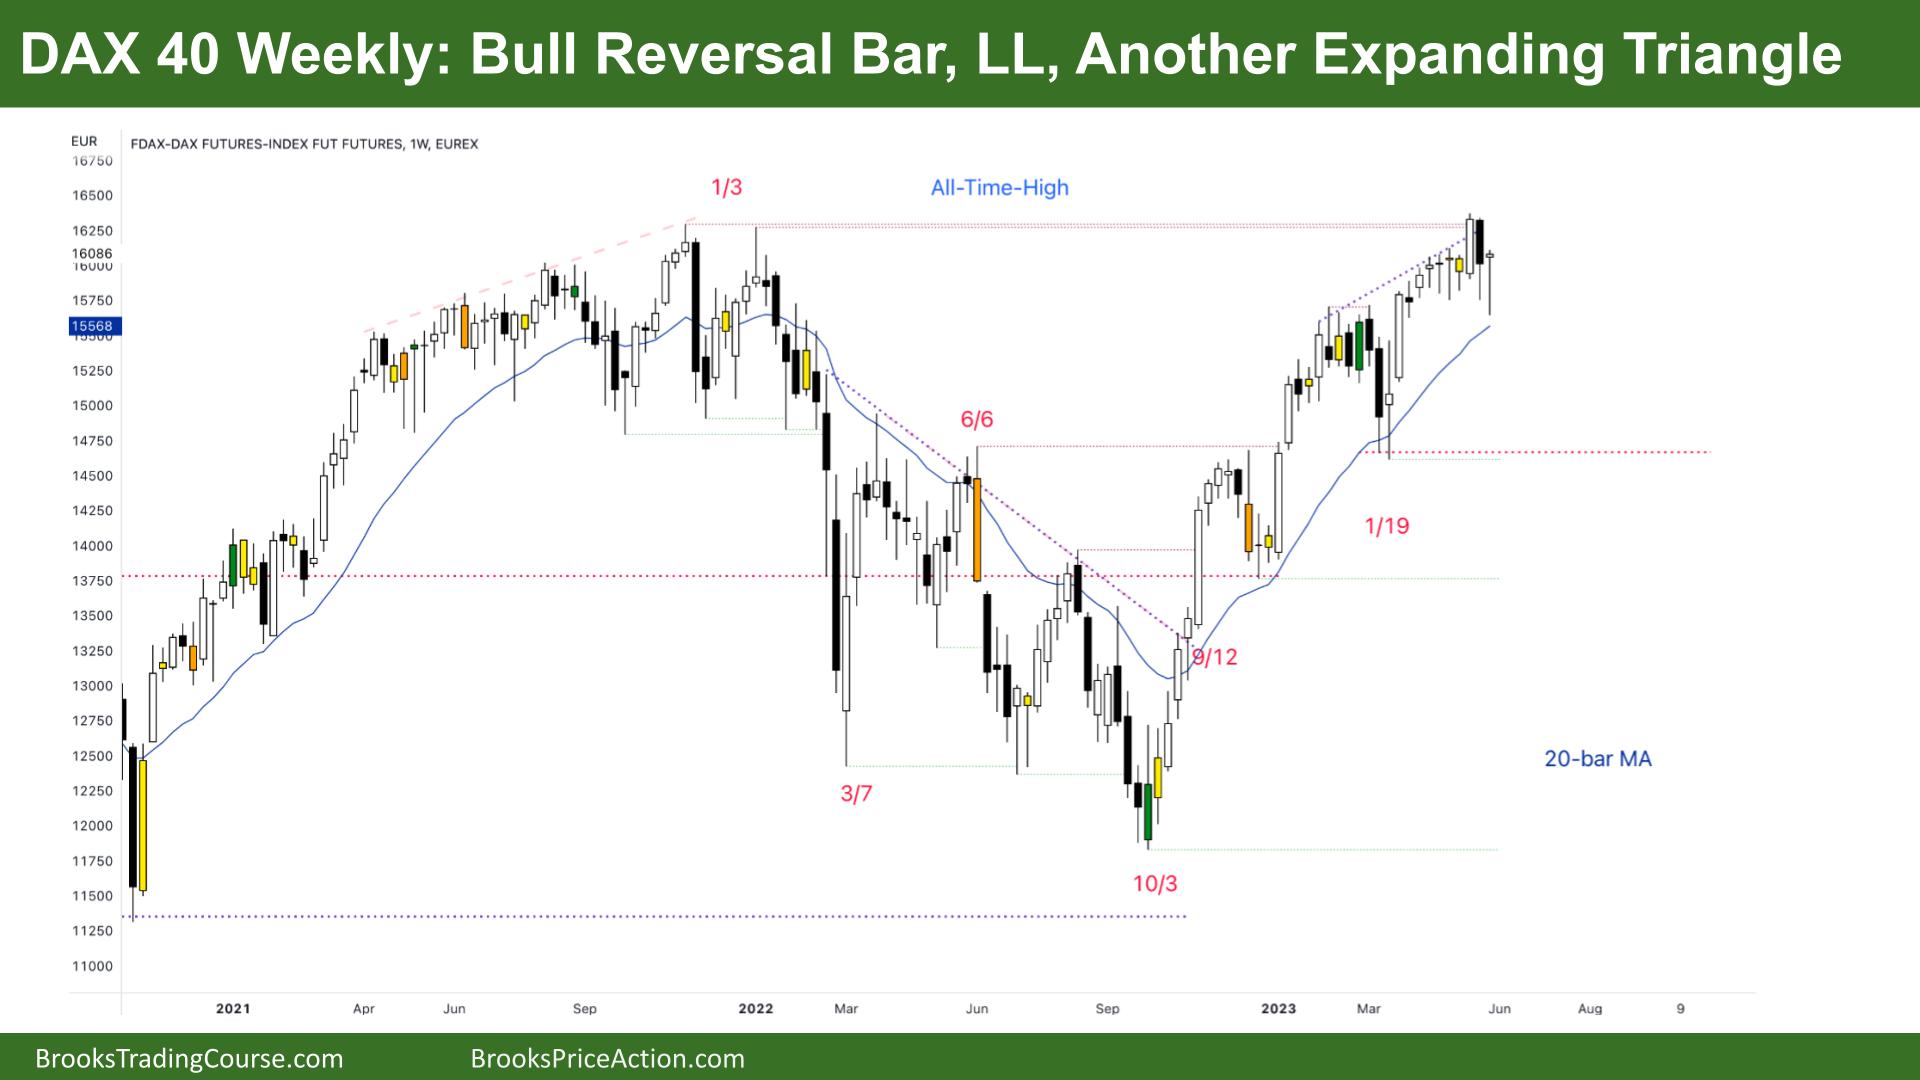 DAX 40 Bull Reversal Bar, LL, Another Expanding Triangle